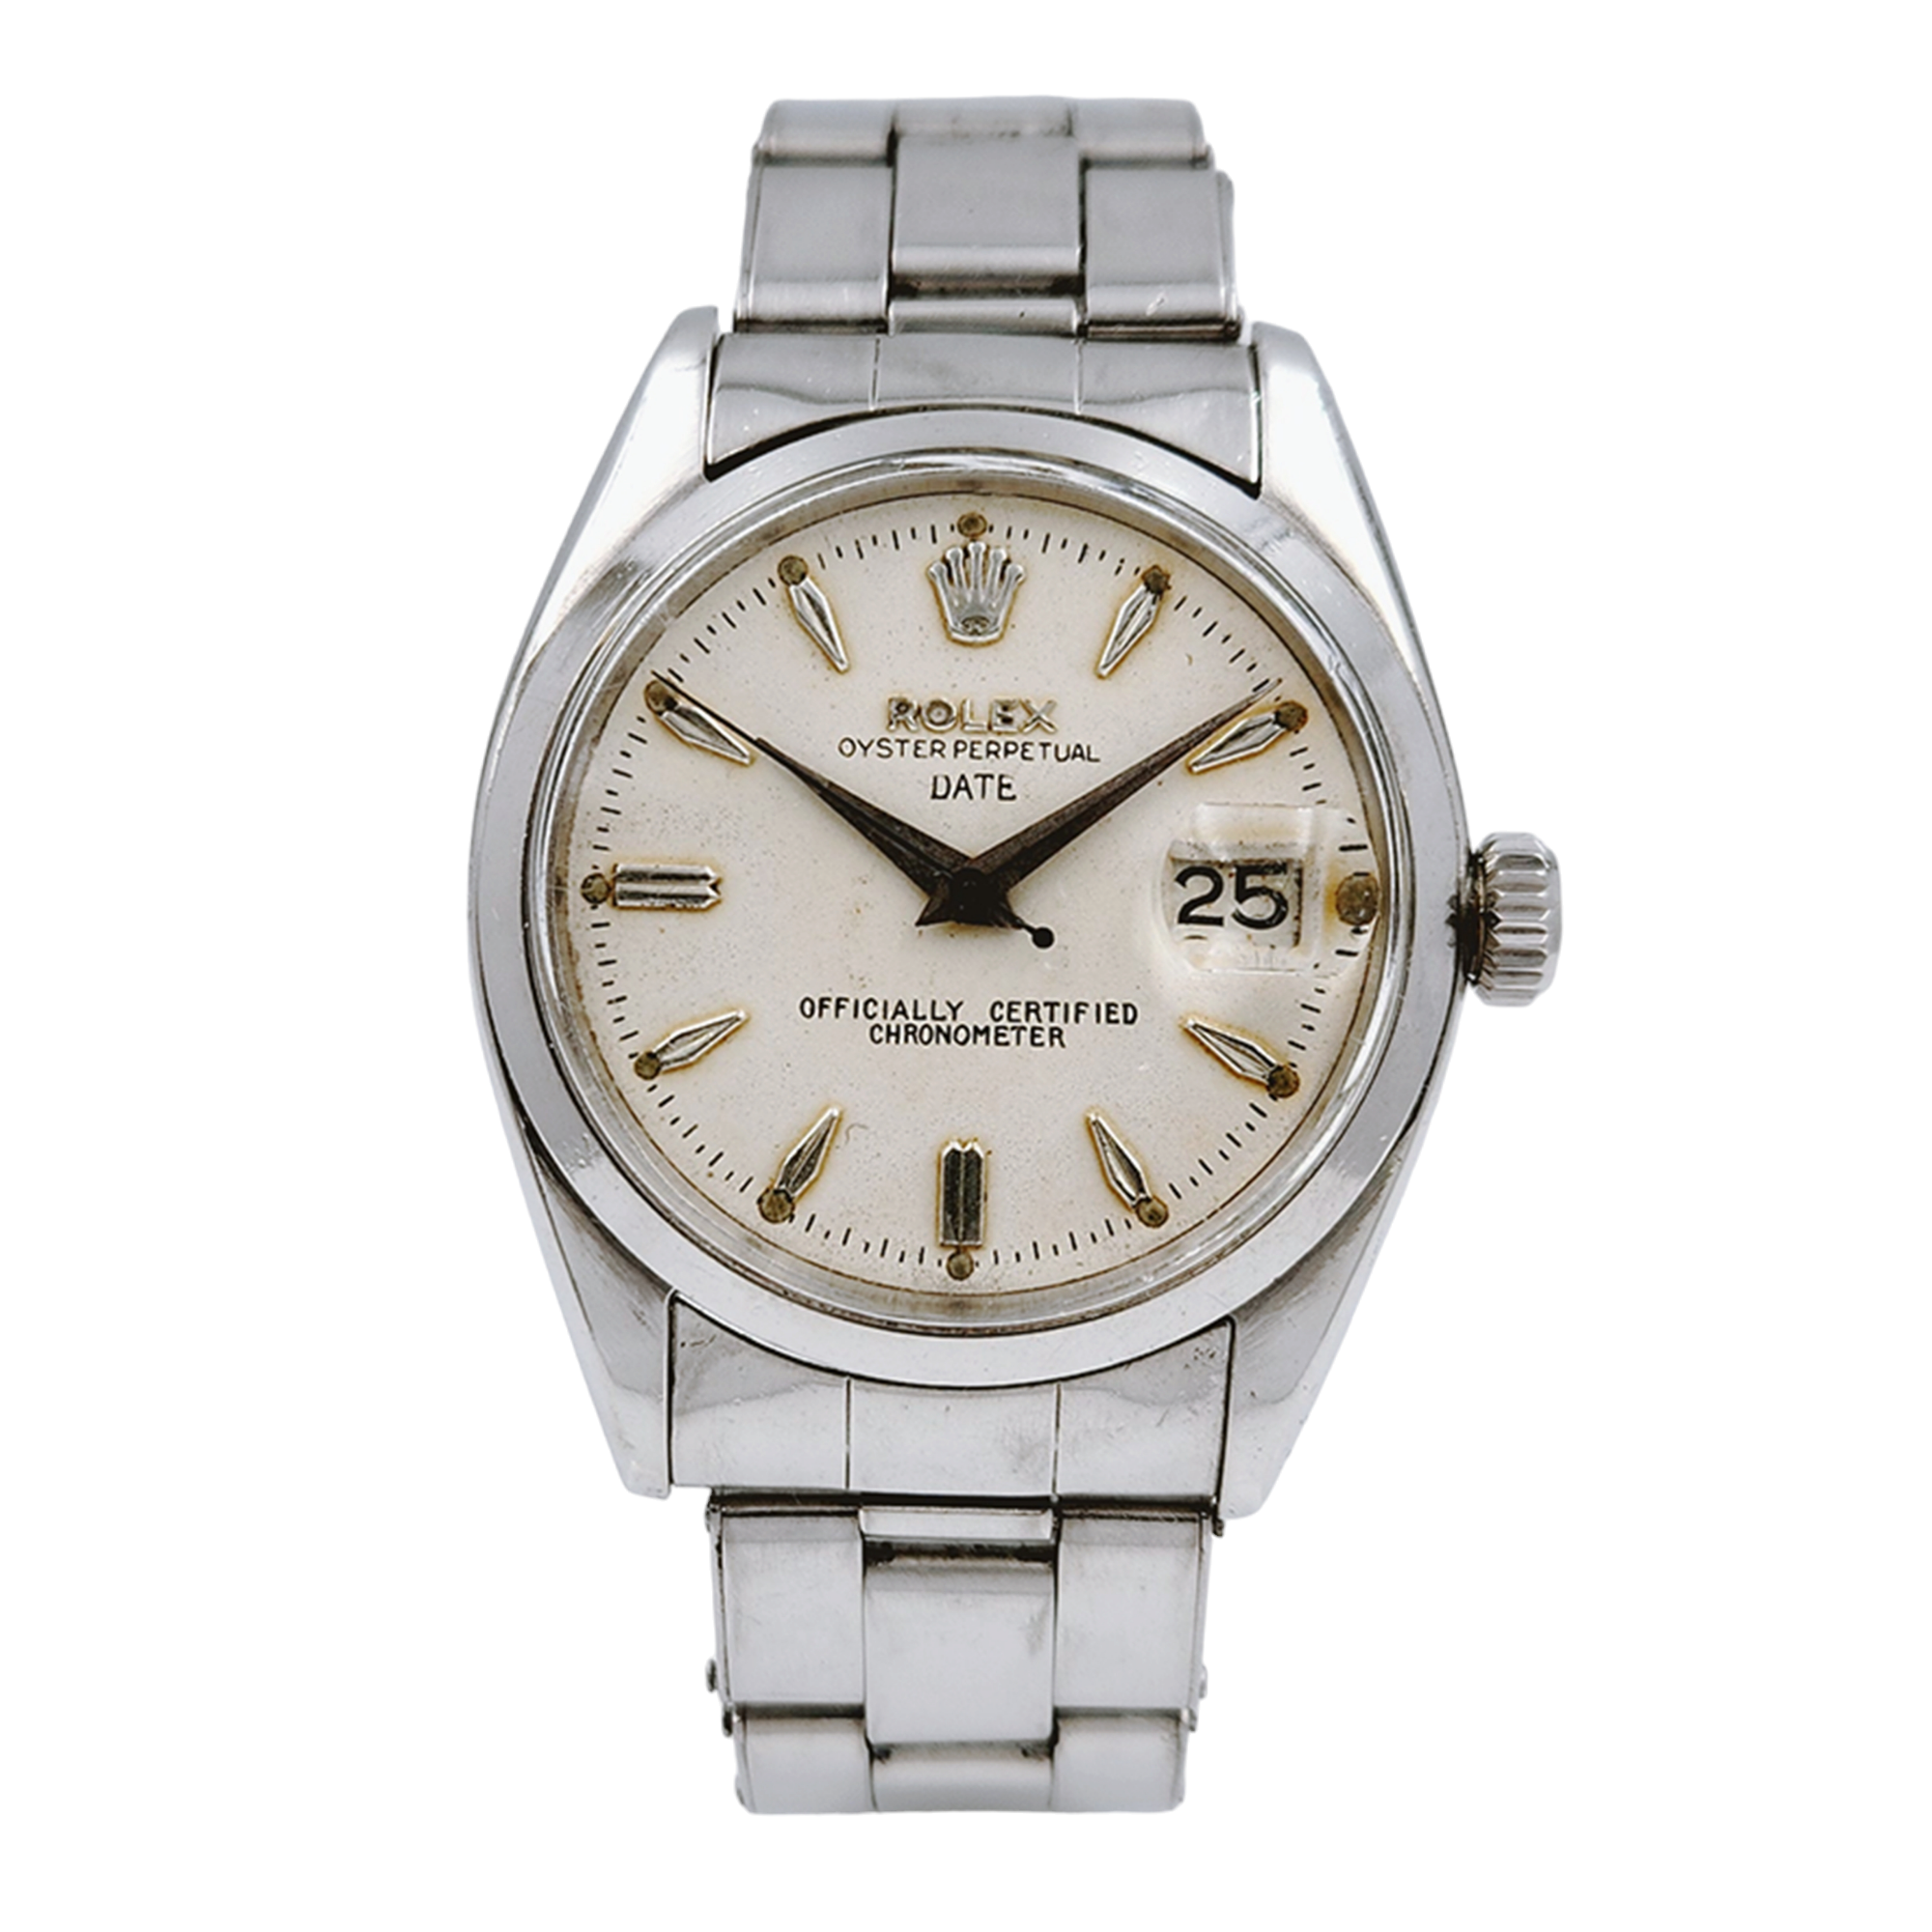 1976 Men's Rolex 34mm Date Vintage Stainless Steel Wristwatch w/ Cream Dial & Smooth Bezel. (Pre-Owned 6534)